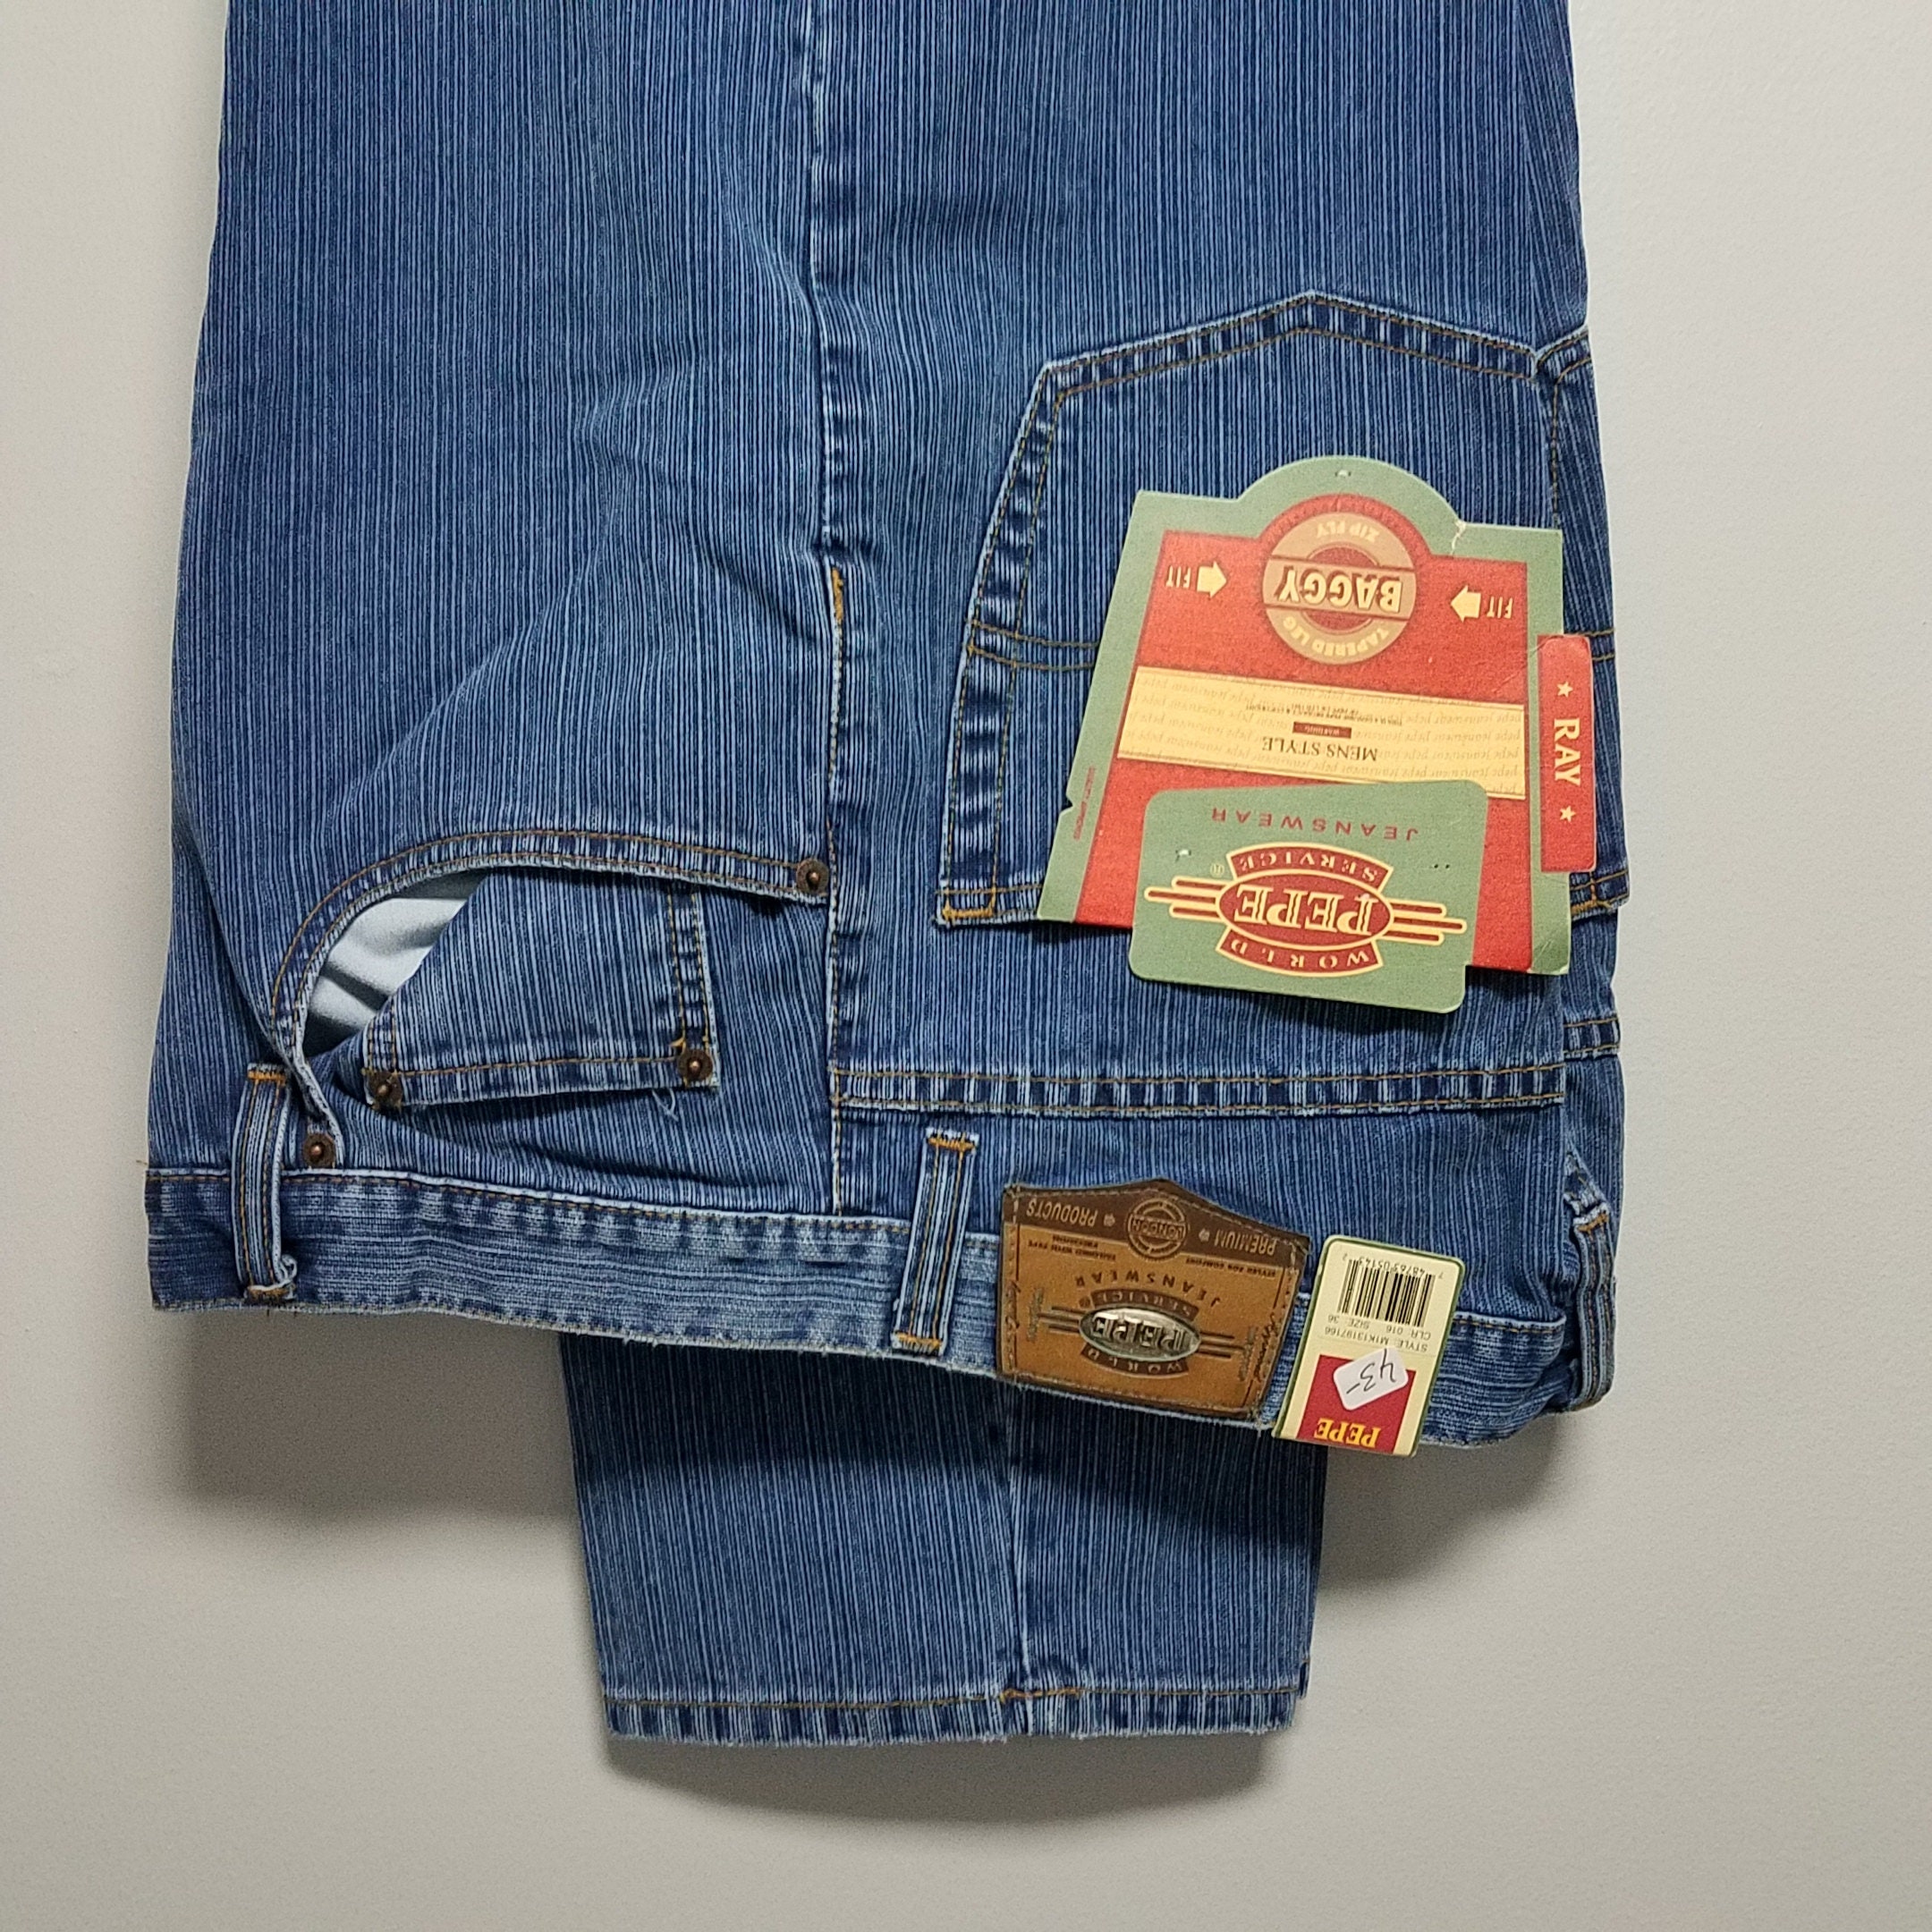 90s Pepe Jeans - Etsy